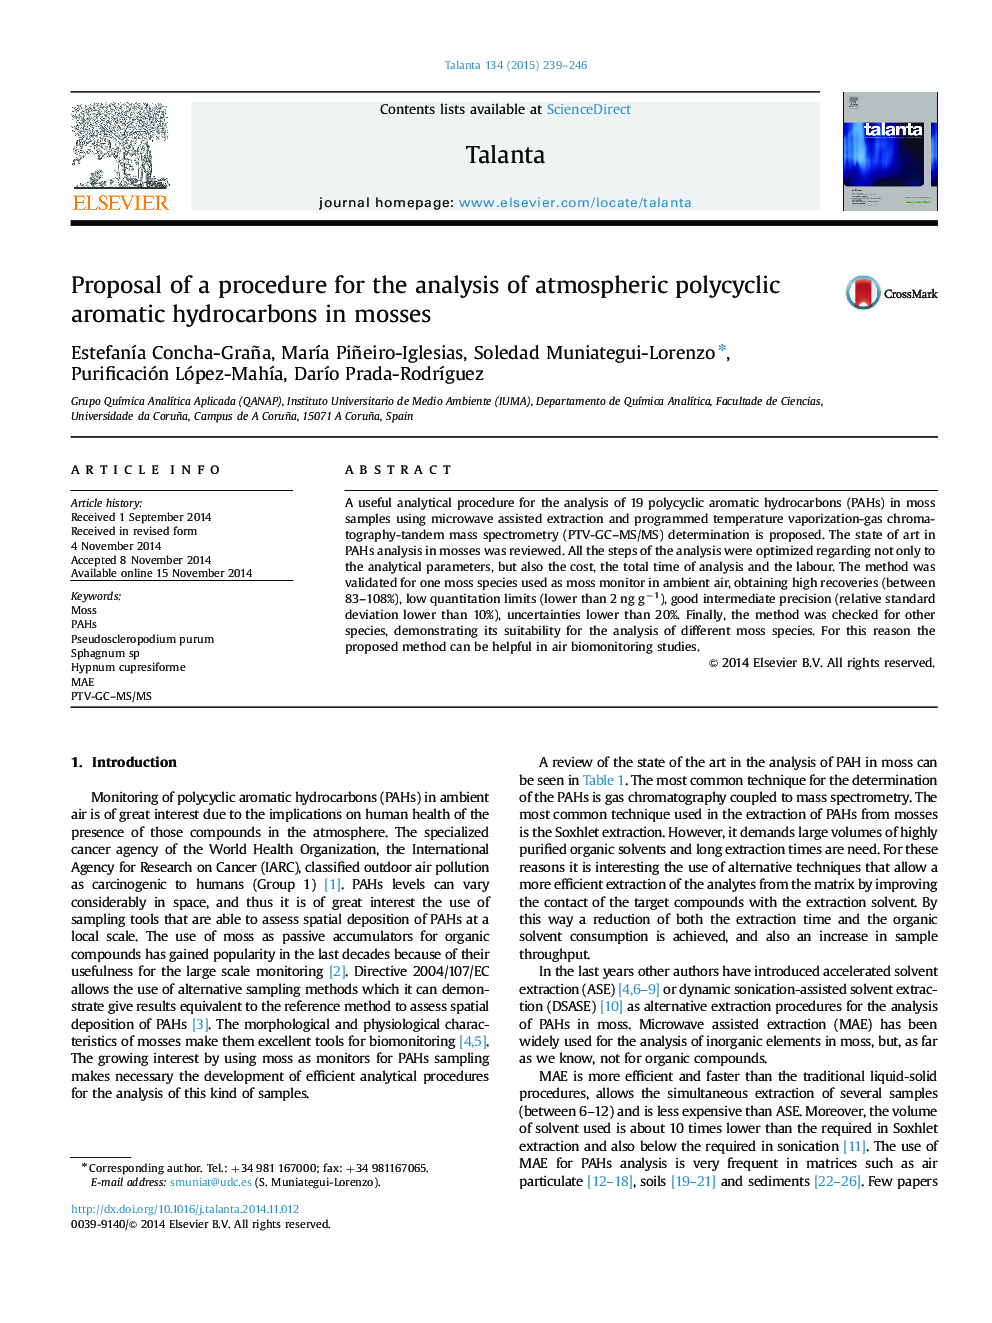 Proposal of a procedure for the analysis of atmospheric polycyclic aromatic hydrocarbons in mosses